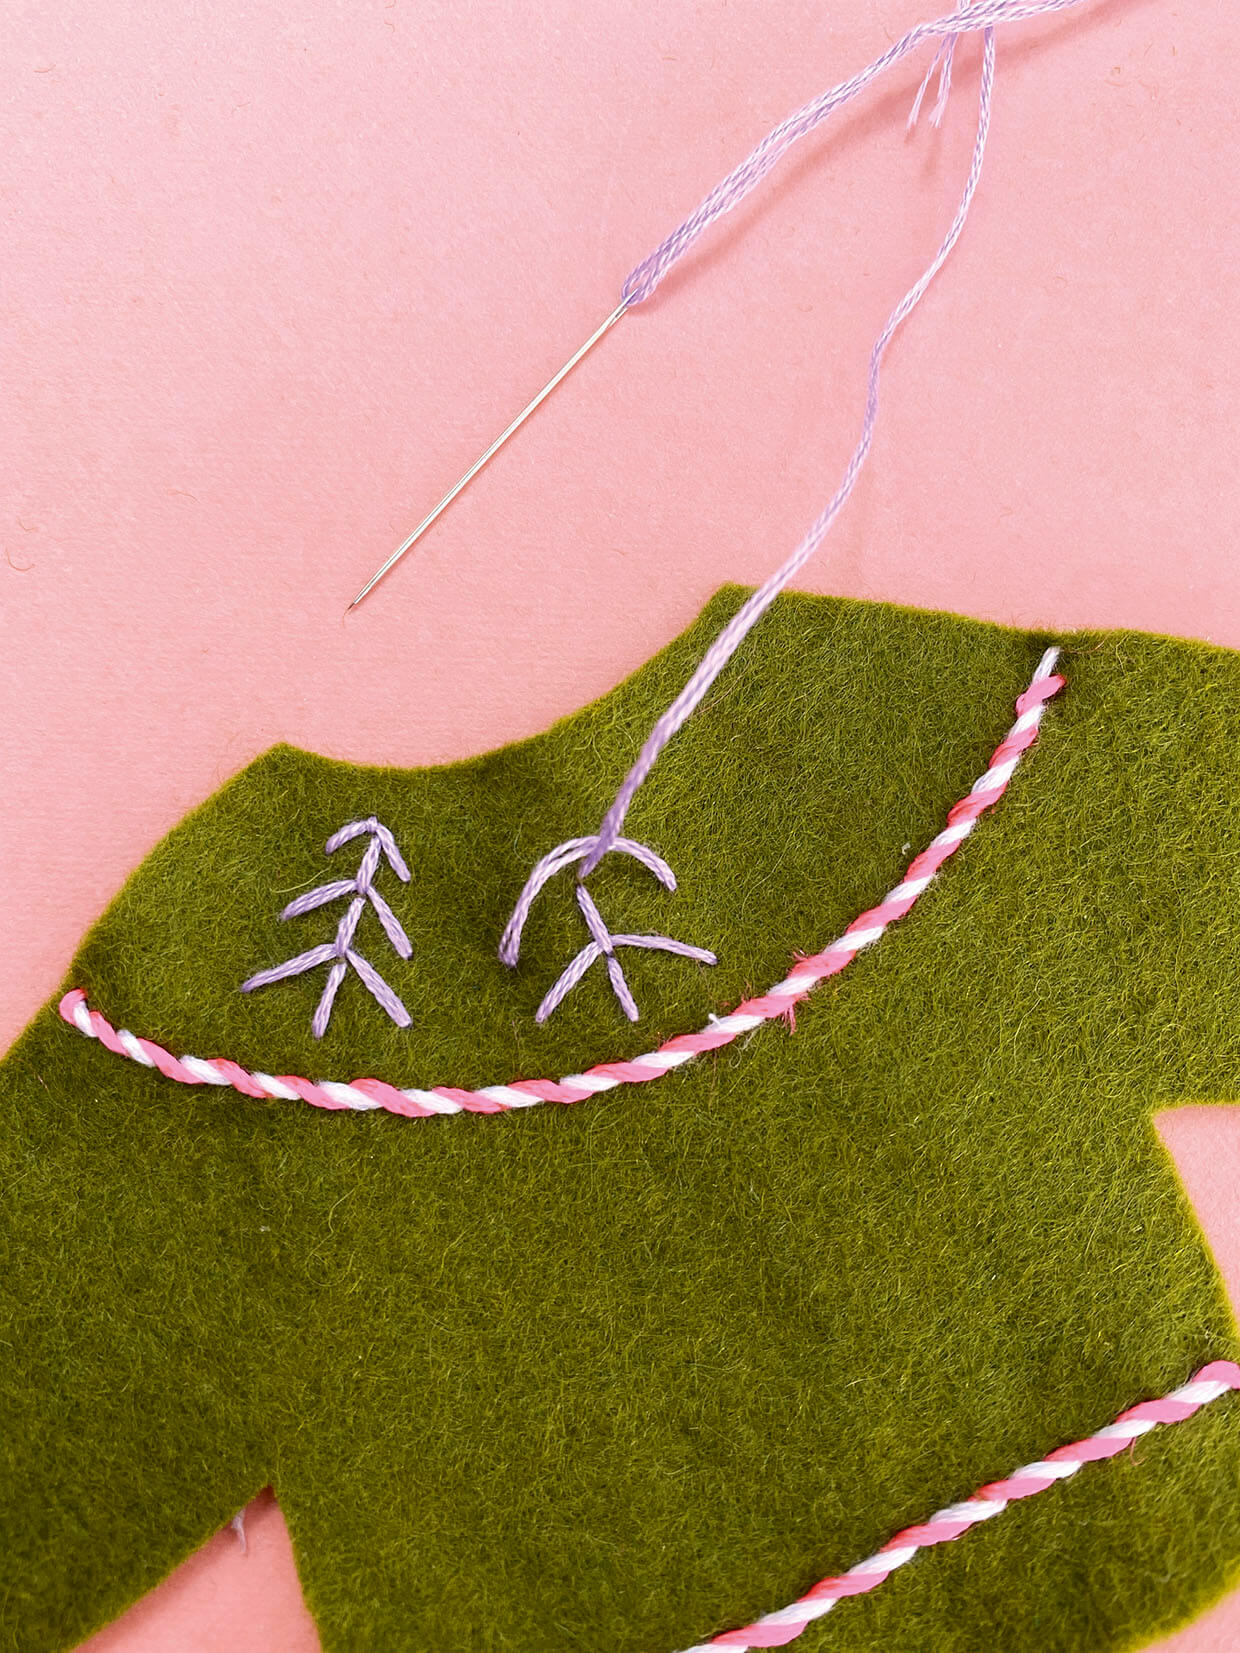 Stitching the trees